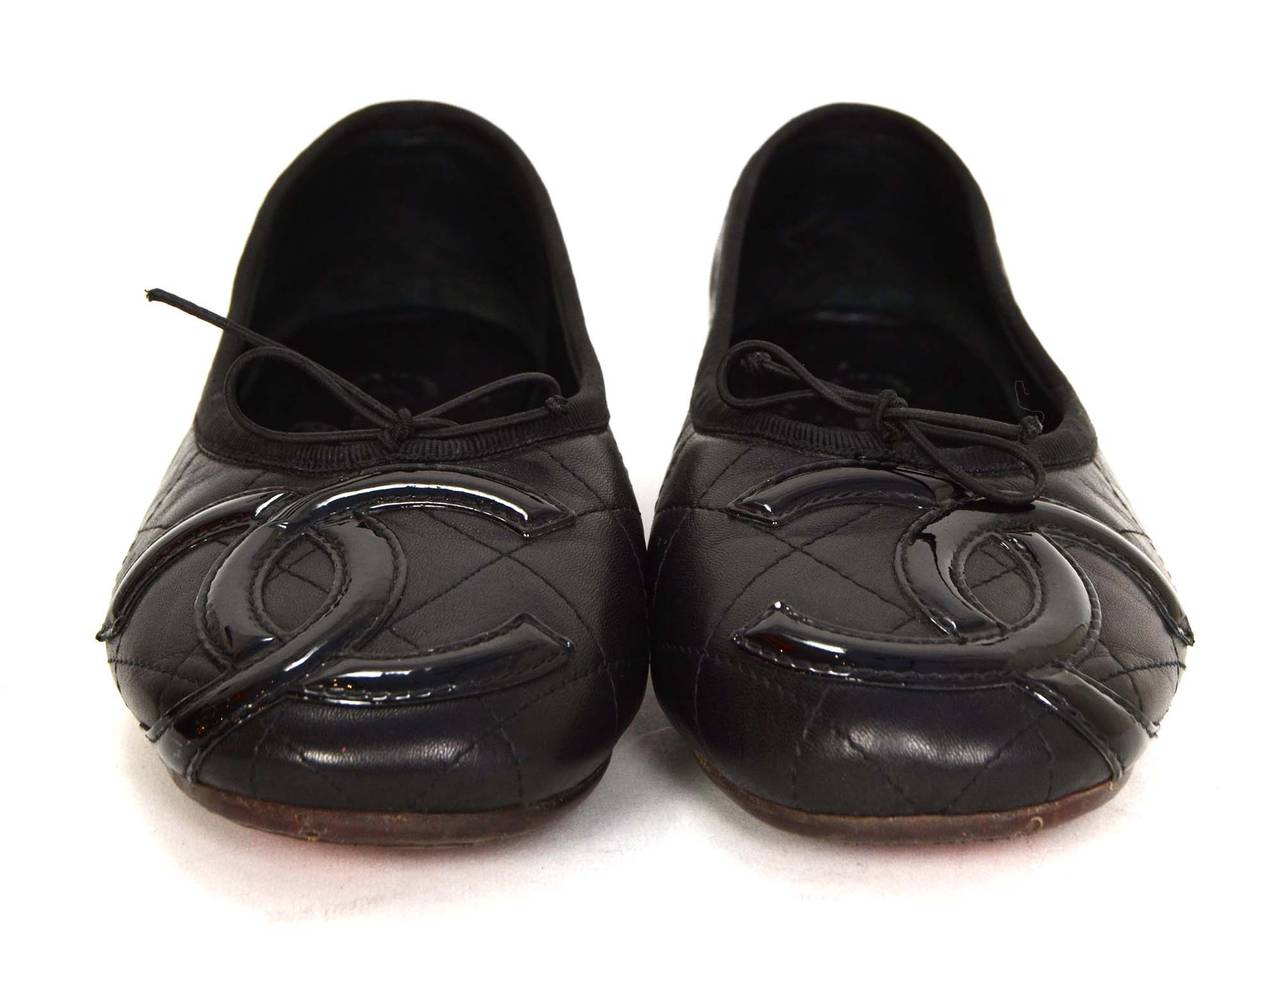 Chanel Black Quilted Leather Cambon Ballet Flats 
Features patent CC on toe with bow
Made in: Italy
Color: Black
Composition: Leather and patent leather
Sole Stamp: Chanel Made in Italy
Closure/opening: Slide on
Overall Condition: Excellent